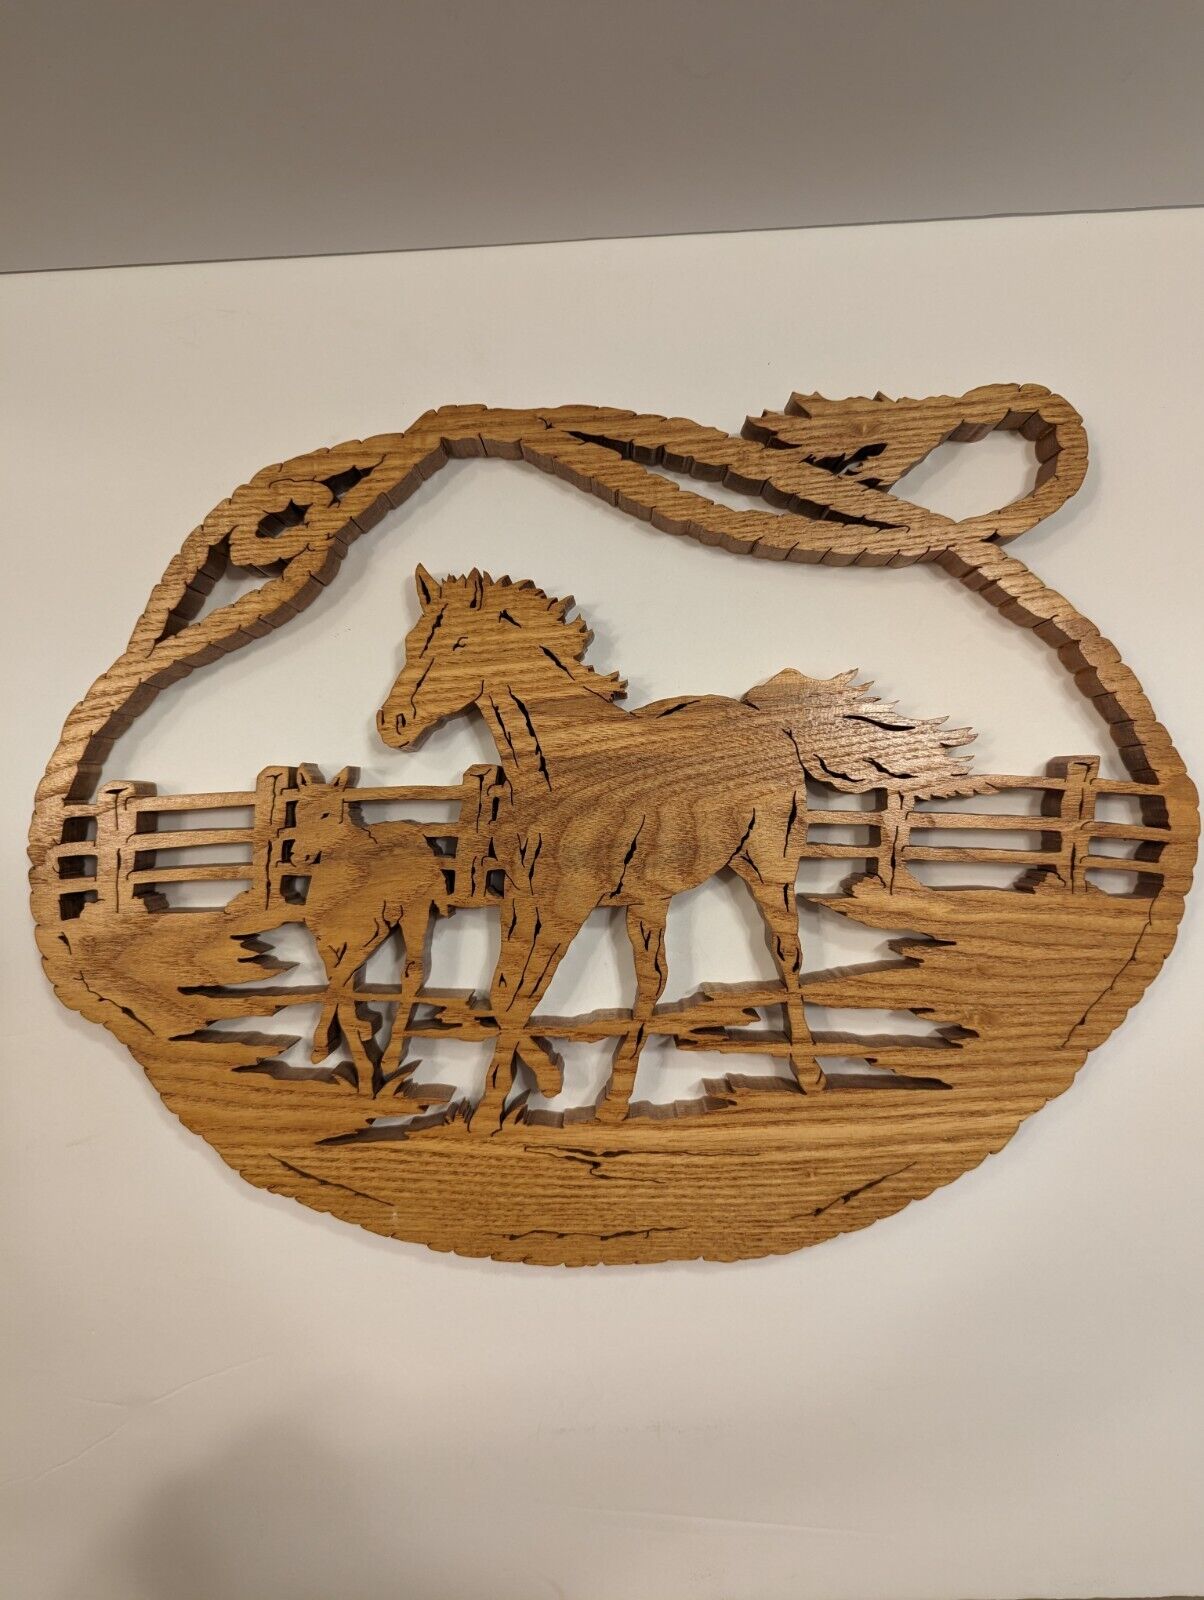 Momma Horse & Fawn Wood Laser Cut Hand Crafted By John Stocker 12